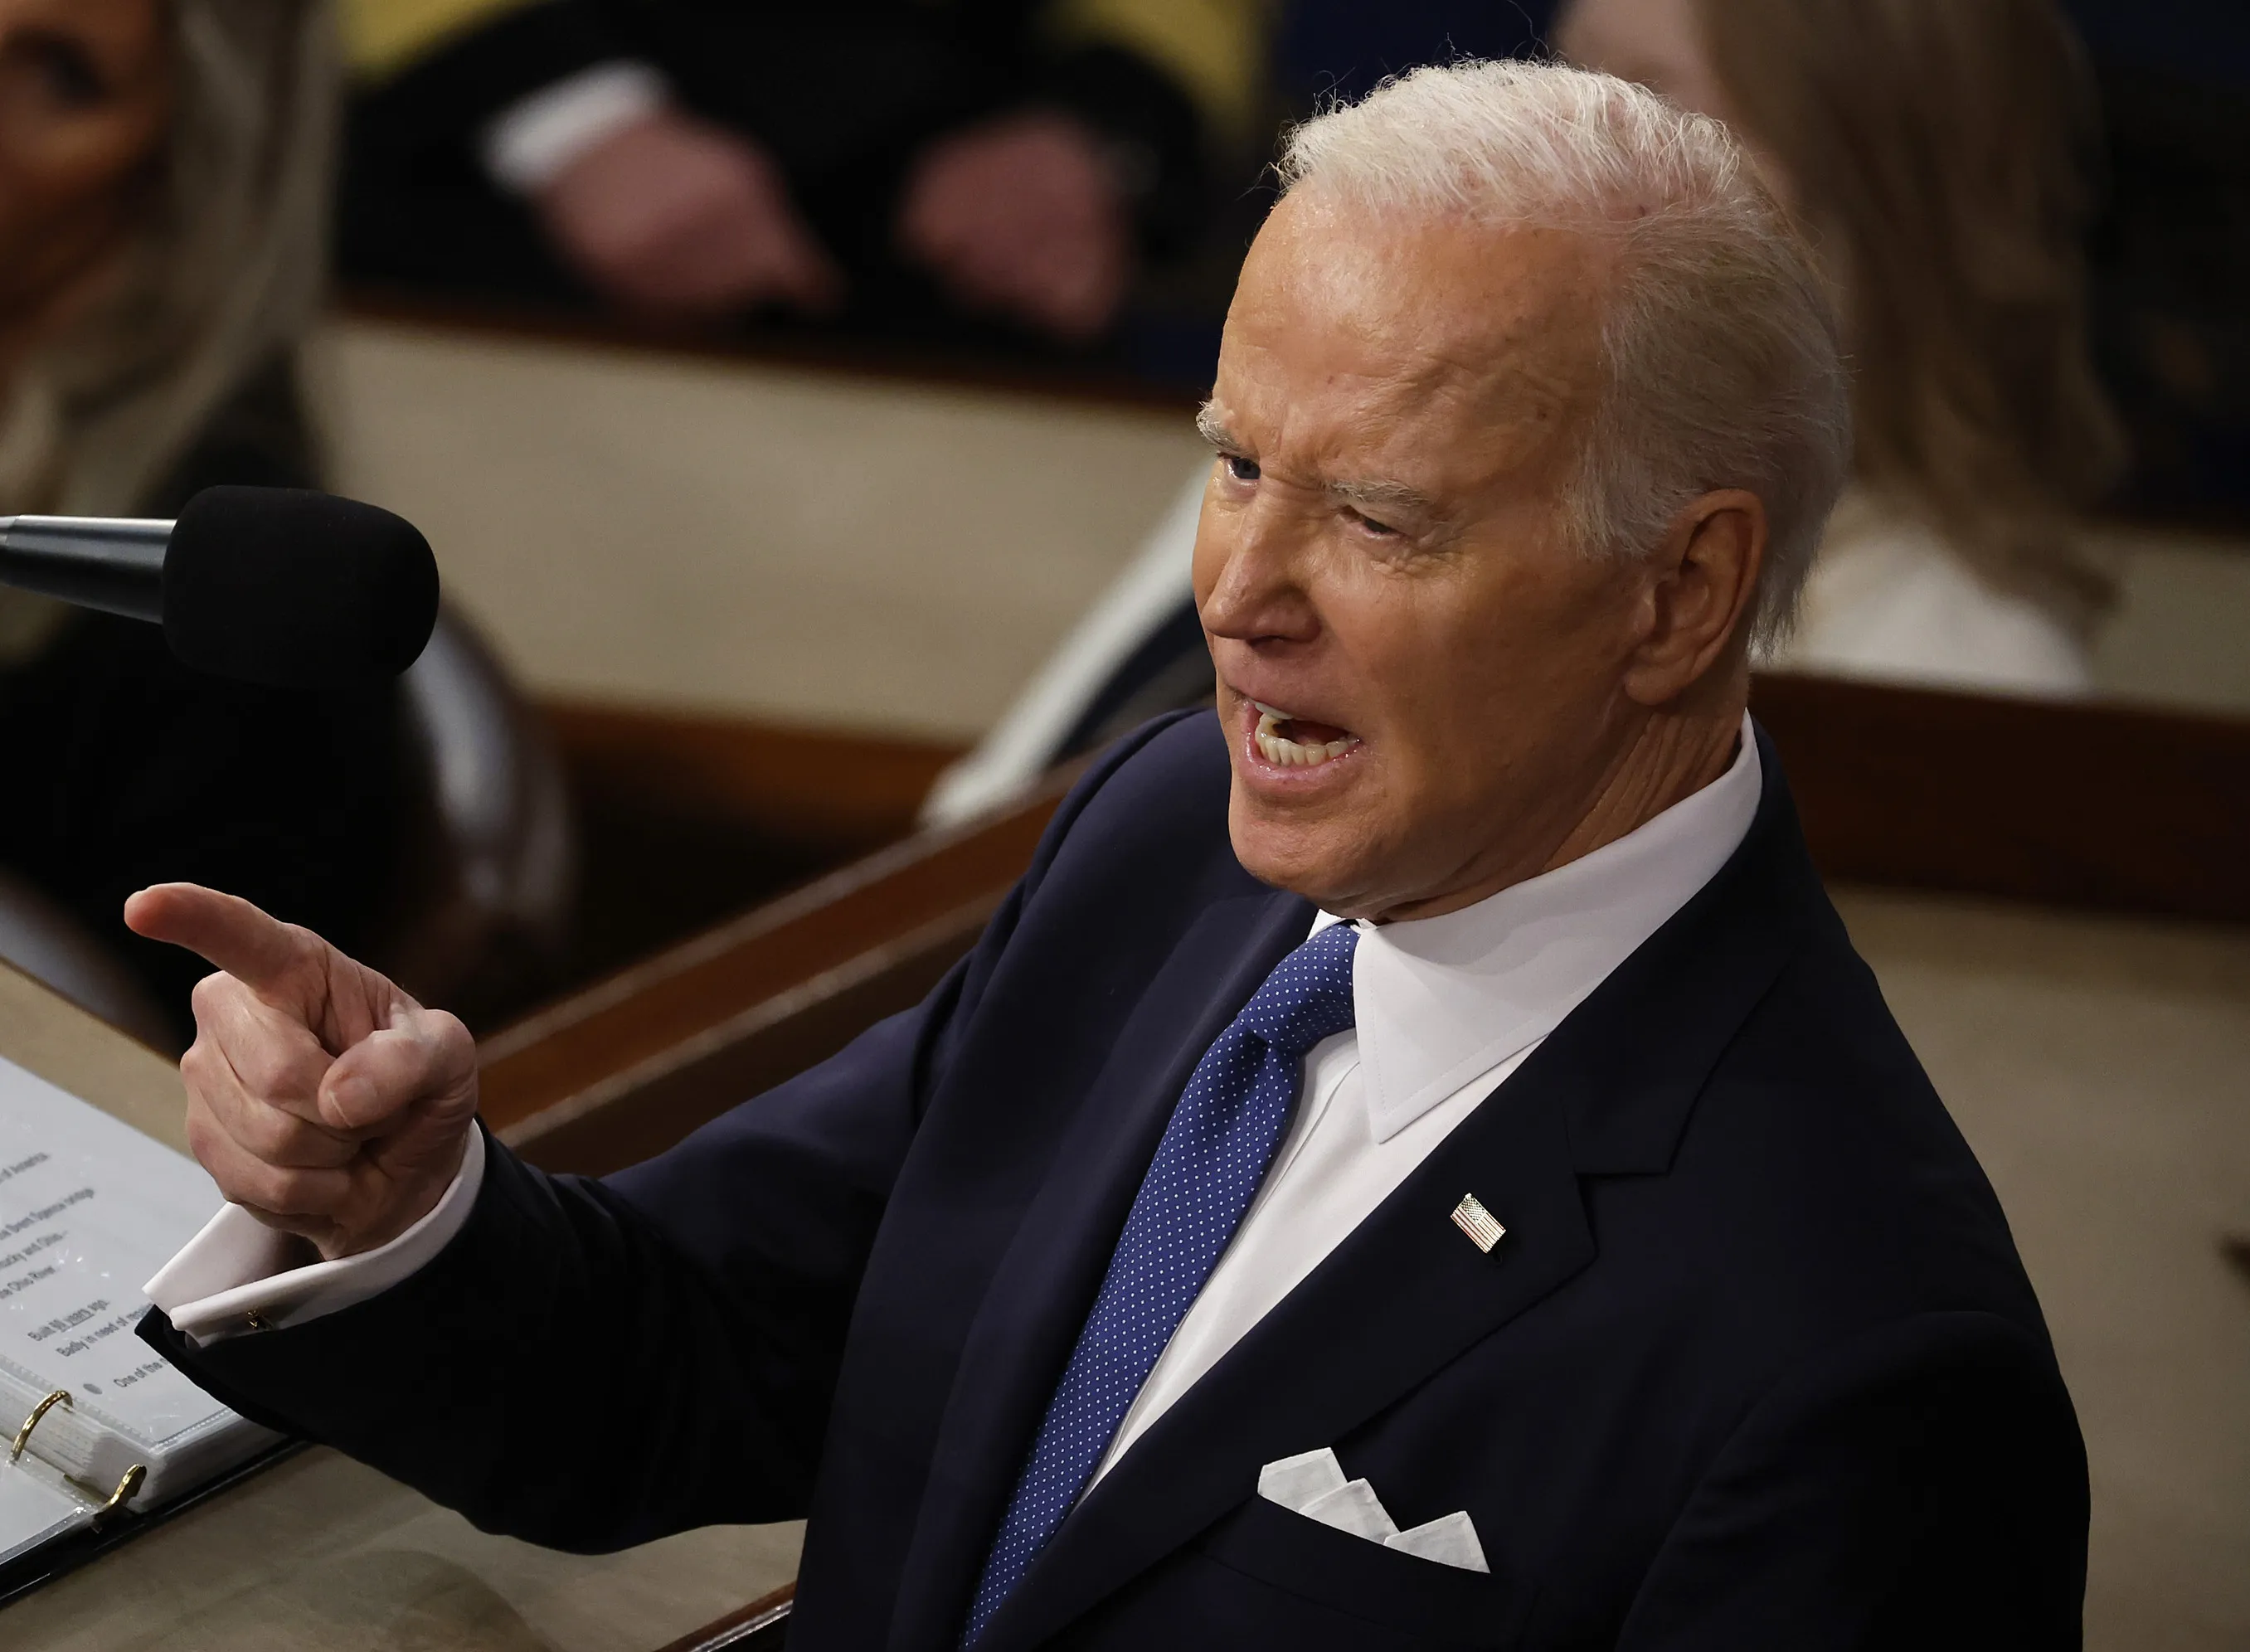 U.S. President Joe Biden delivers his State of the Union address during a joint meeting of Congress in the House Chamber of the U.S. Capitol on Feb. 7, 2023, in Washington, D.C. The speech marks Biden's first address to the new Republican-controlled House.?w=200&h=150